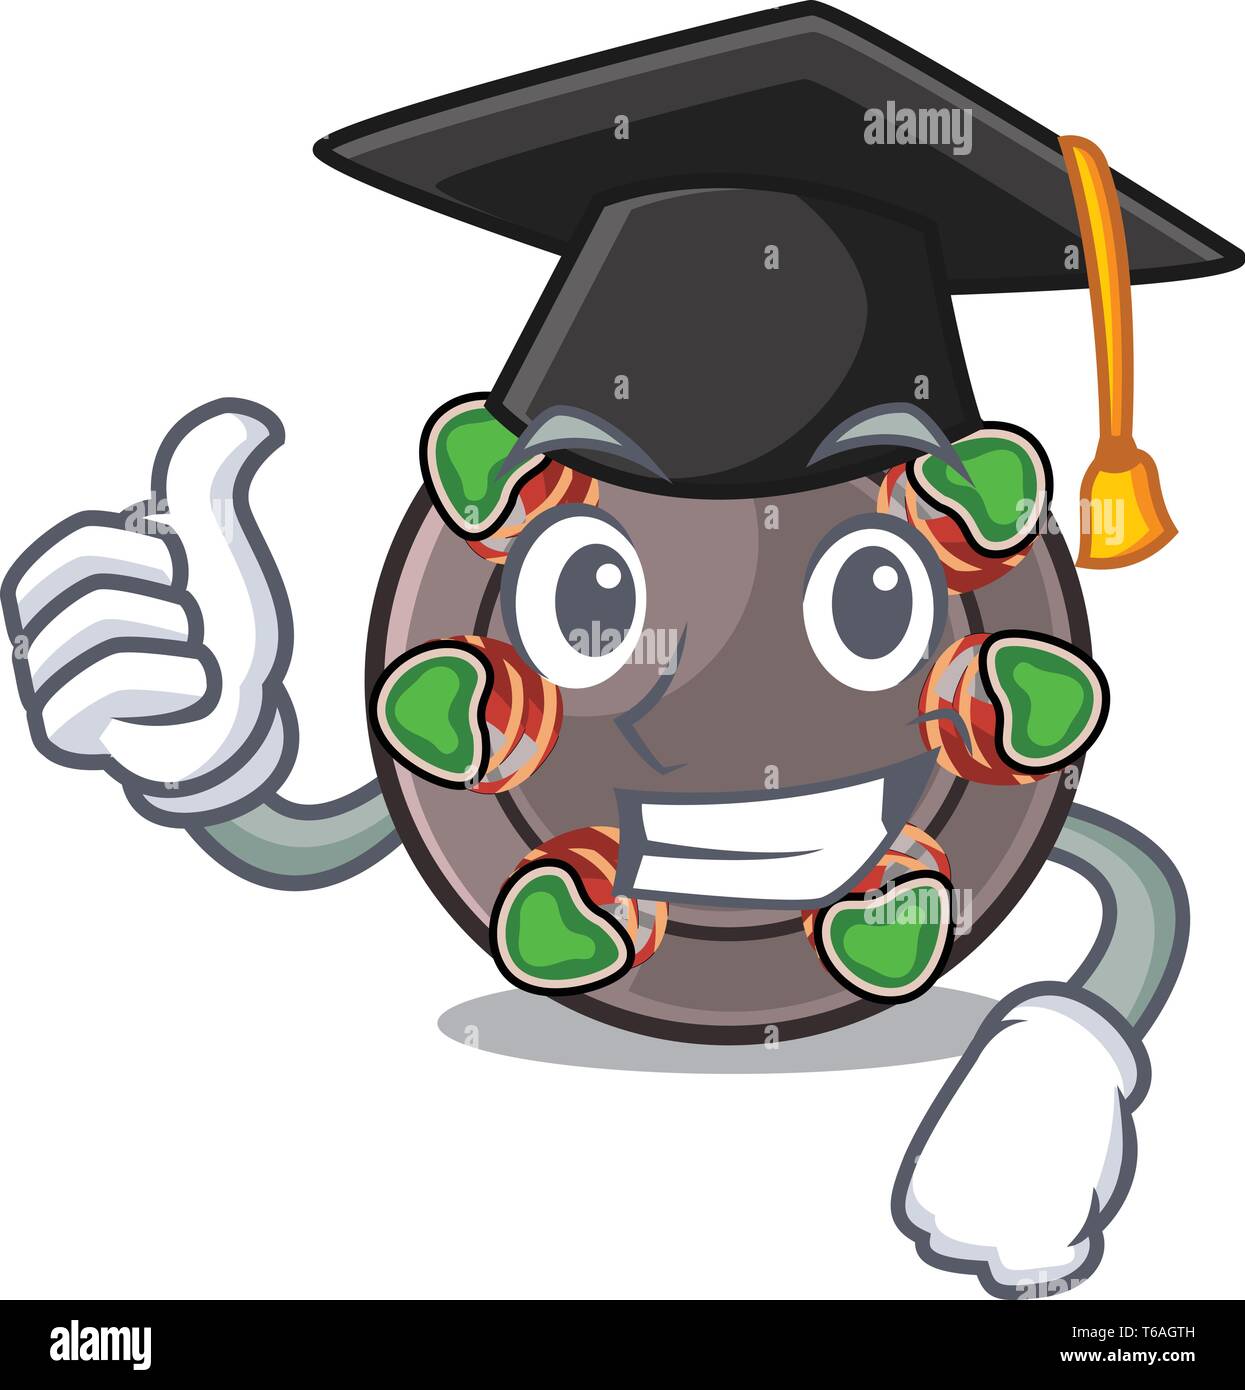 Graduation escargot is presented on character plates Stock Vector